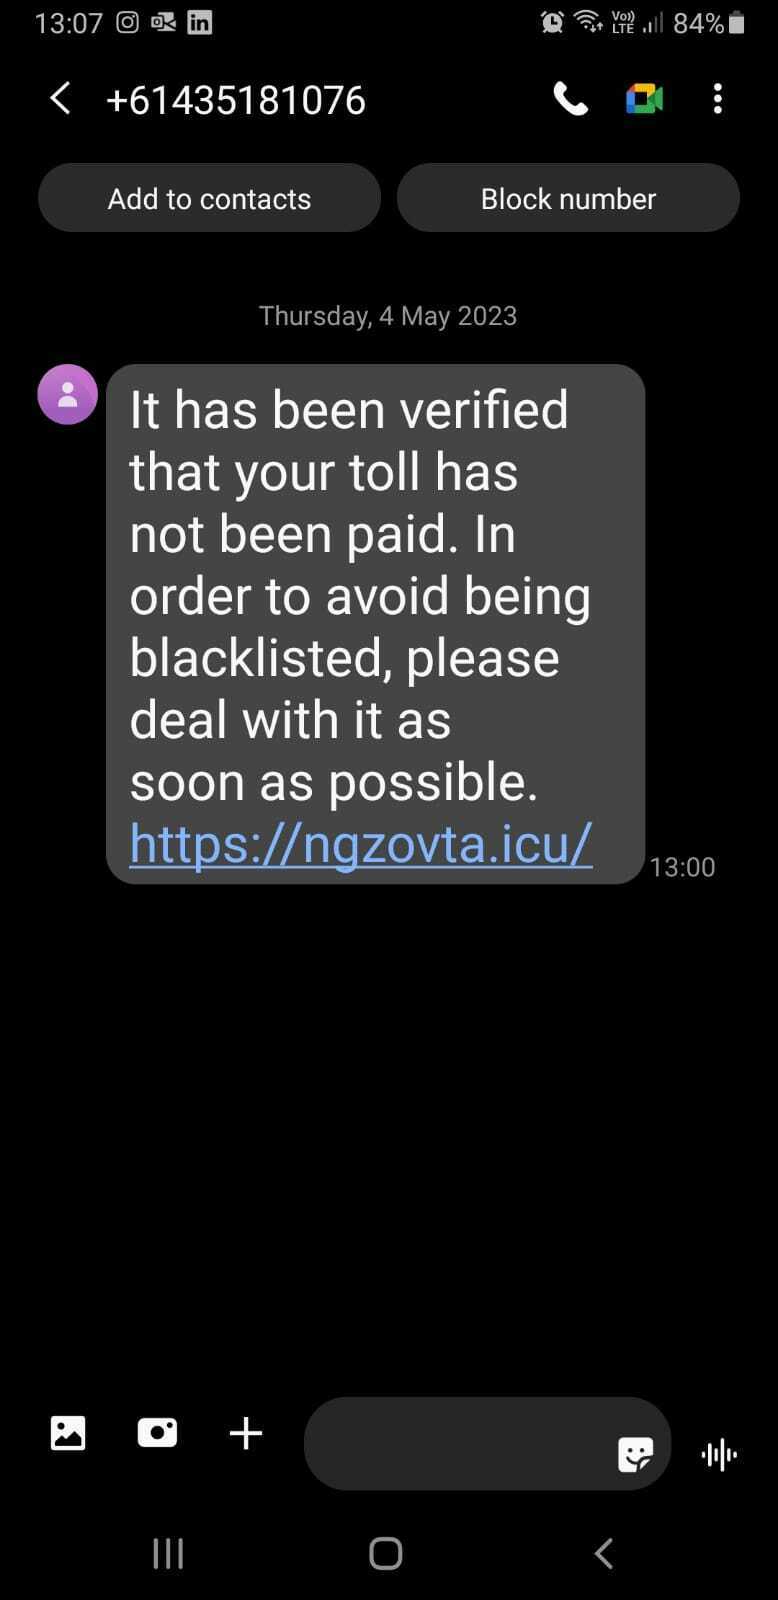 it has been verified that your toll has not been paid | warning about an SMS text scam